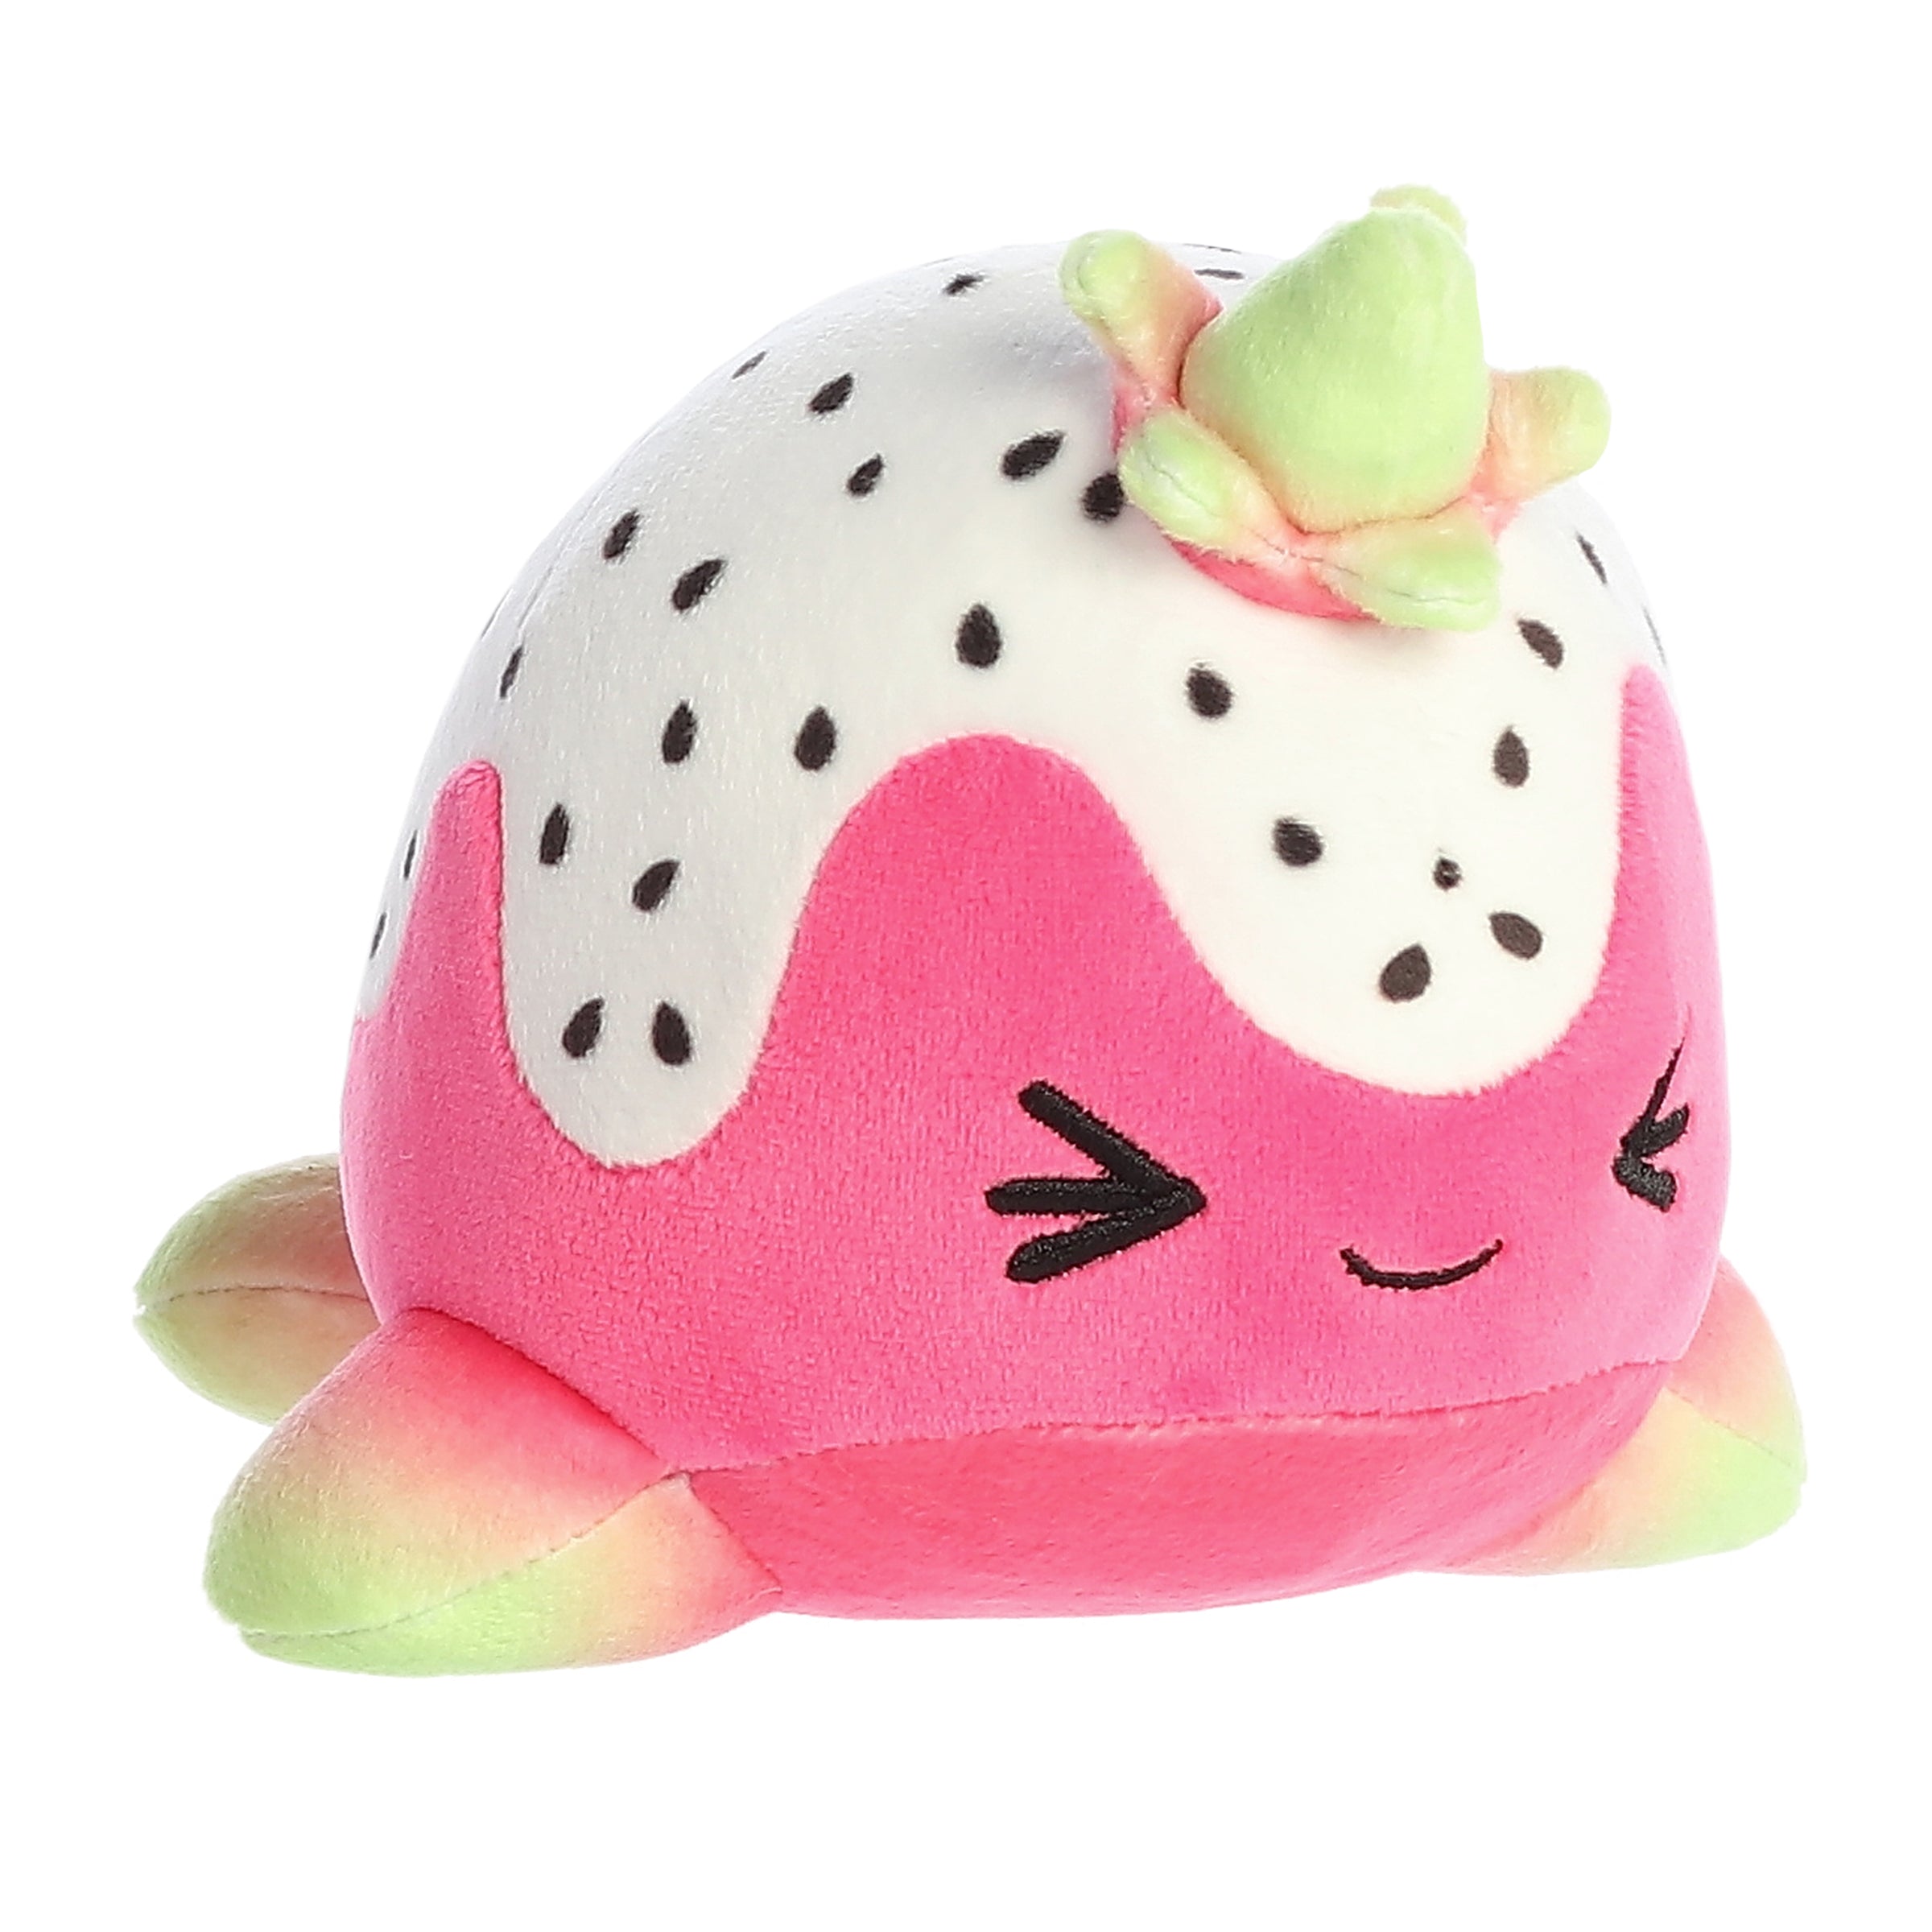 A pink and white Tasty Peach Nomwhal plush that is an expressive narwhal with the color scheme of a dragonfruit